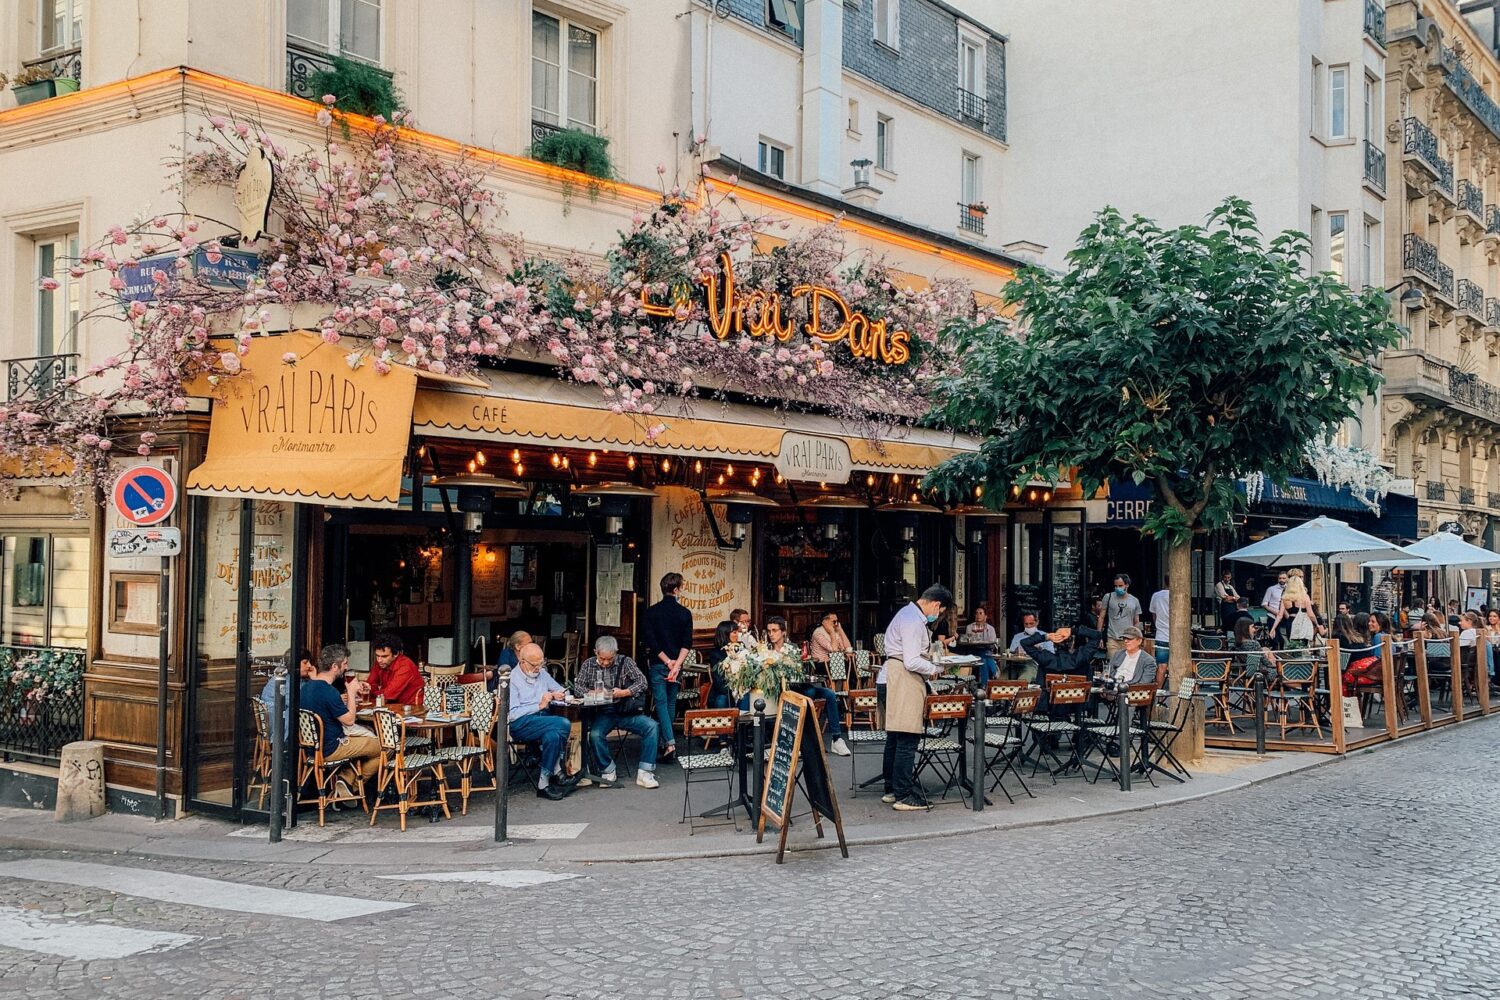 Detail of cafe in paris with flowers and people eating